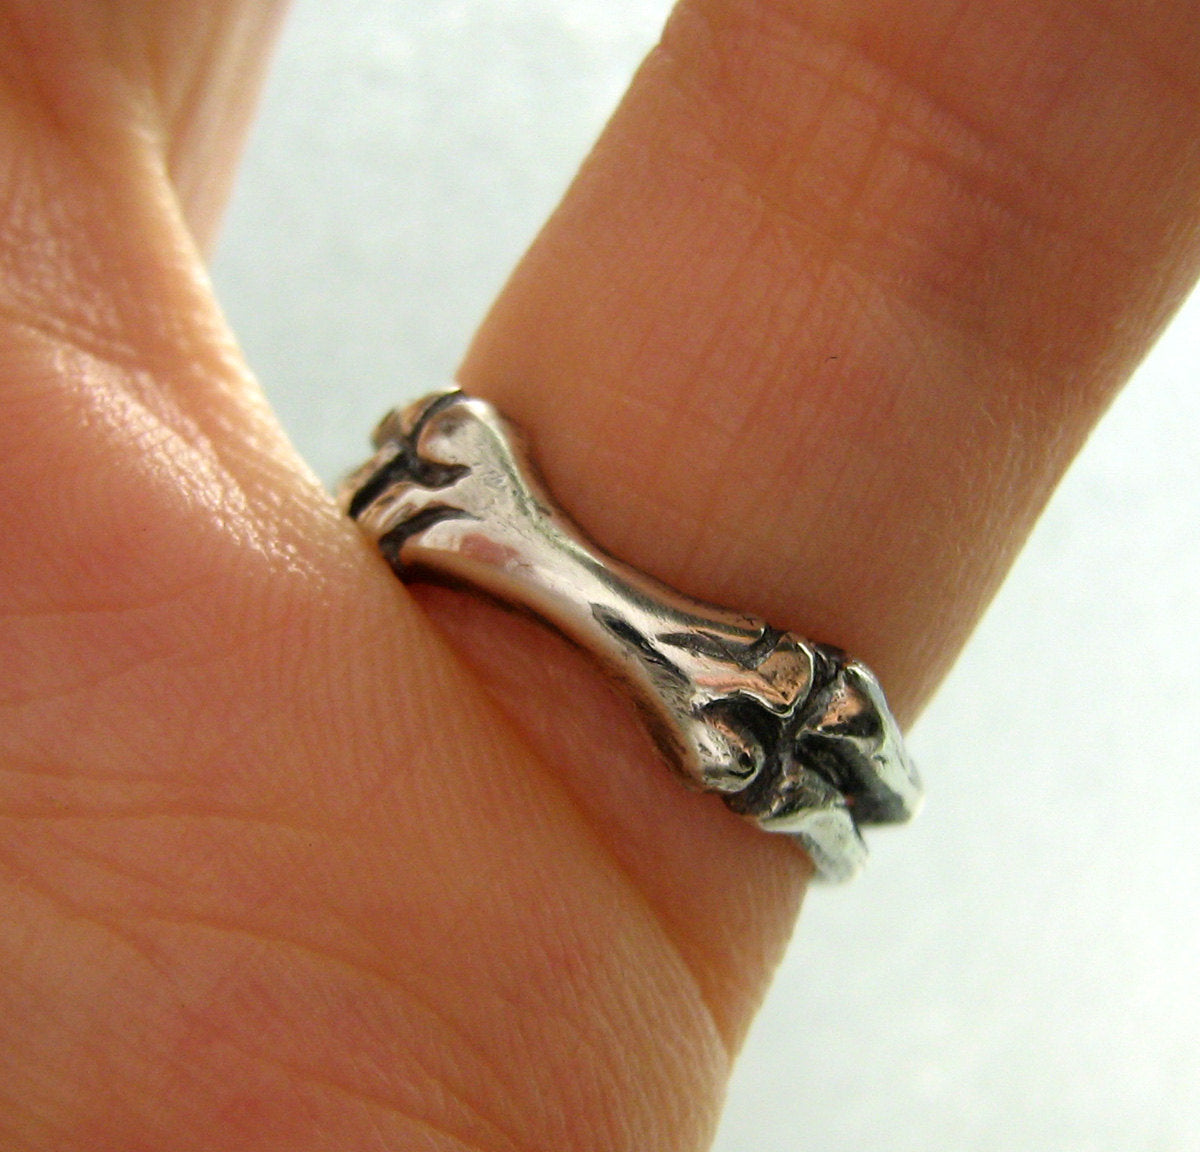 Love in Hand - Anatomical Heart Claddagh Ring, Skeleton Hands, Handmade, Sterling SIlver, Gift For Her, Modern Claddagh Rickson Jewellery 58